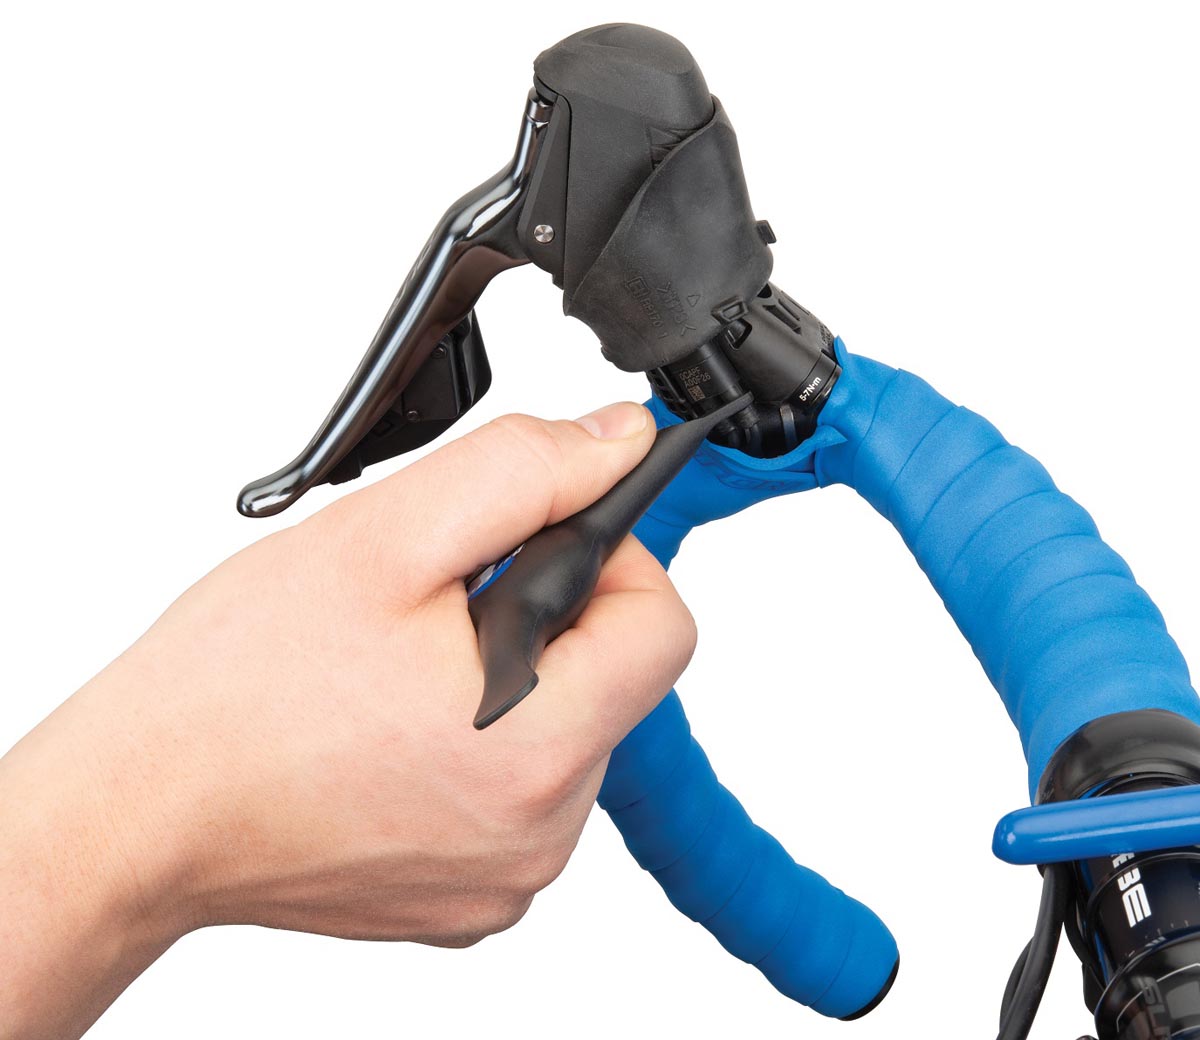 Park Tool makes service smarter w/ Dummy Fork Tool, Electric Shift Tool, and reuseable overhaul mat